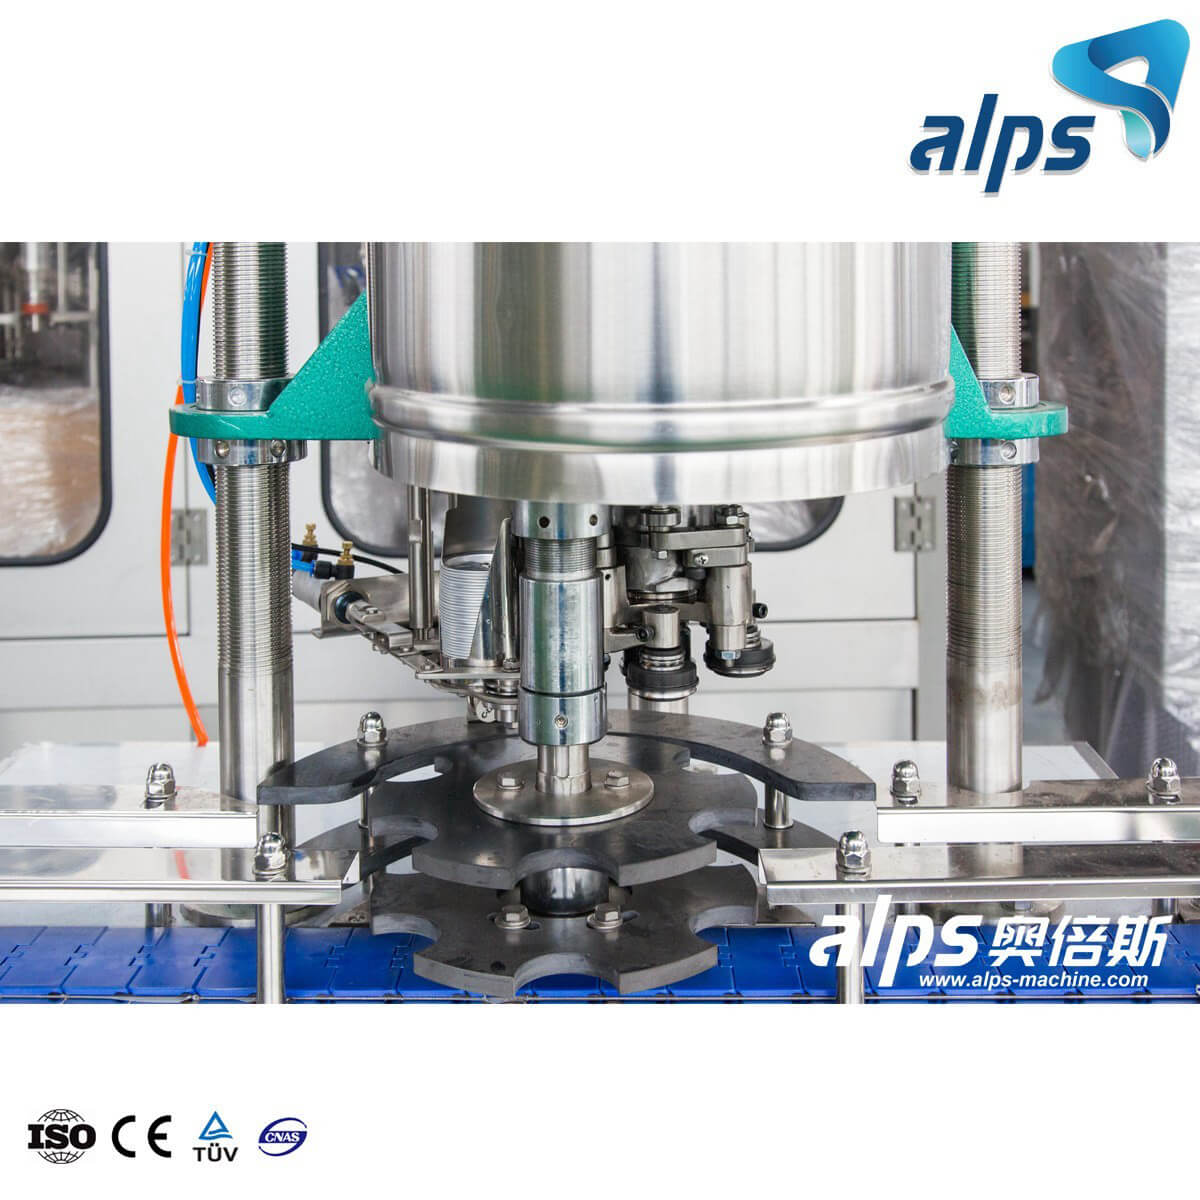 Small Bottle Linear Type Beverage Filling Machine Production Line